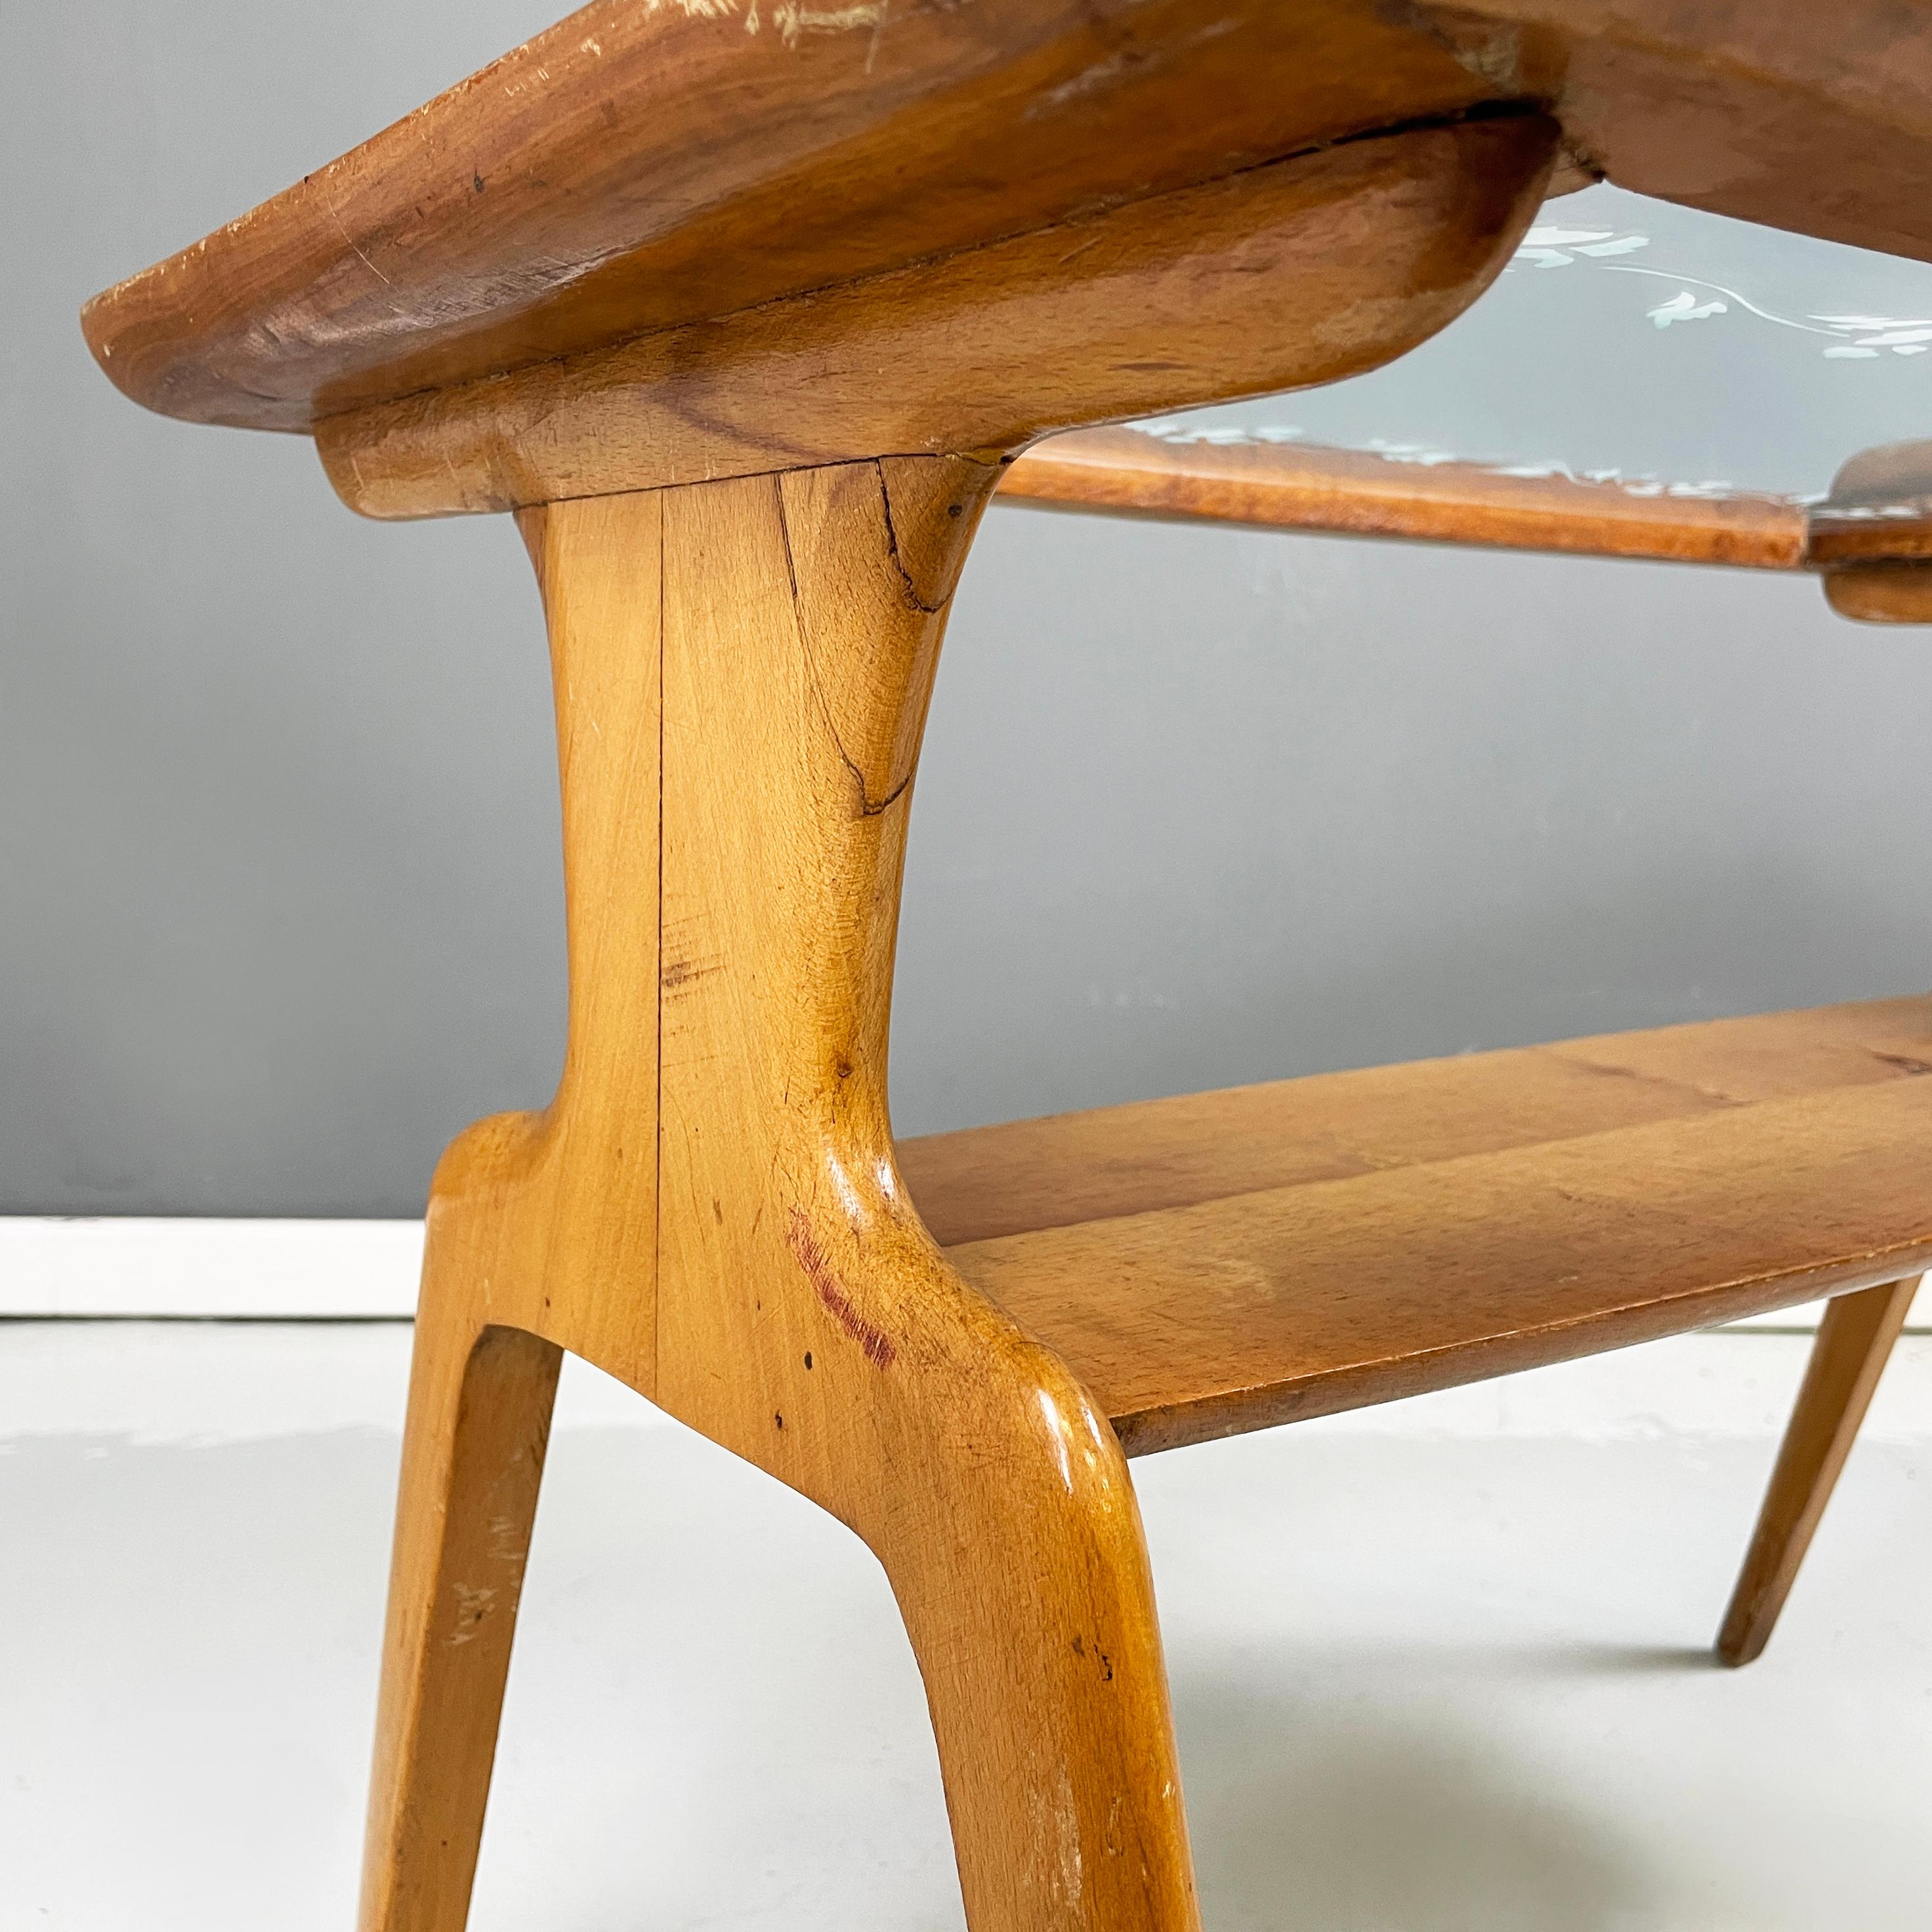 Italian mid-century modern Coffee table in wood and decorated glass, 1950s For Sale 7